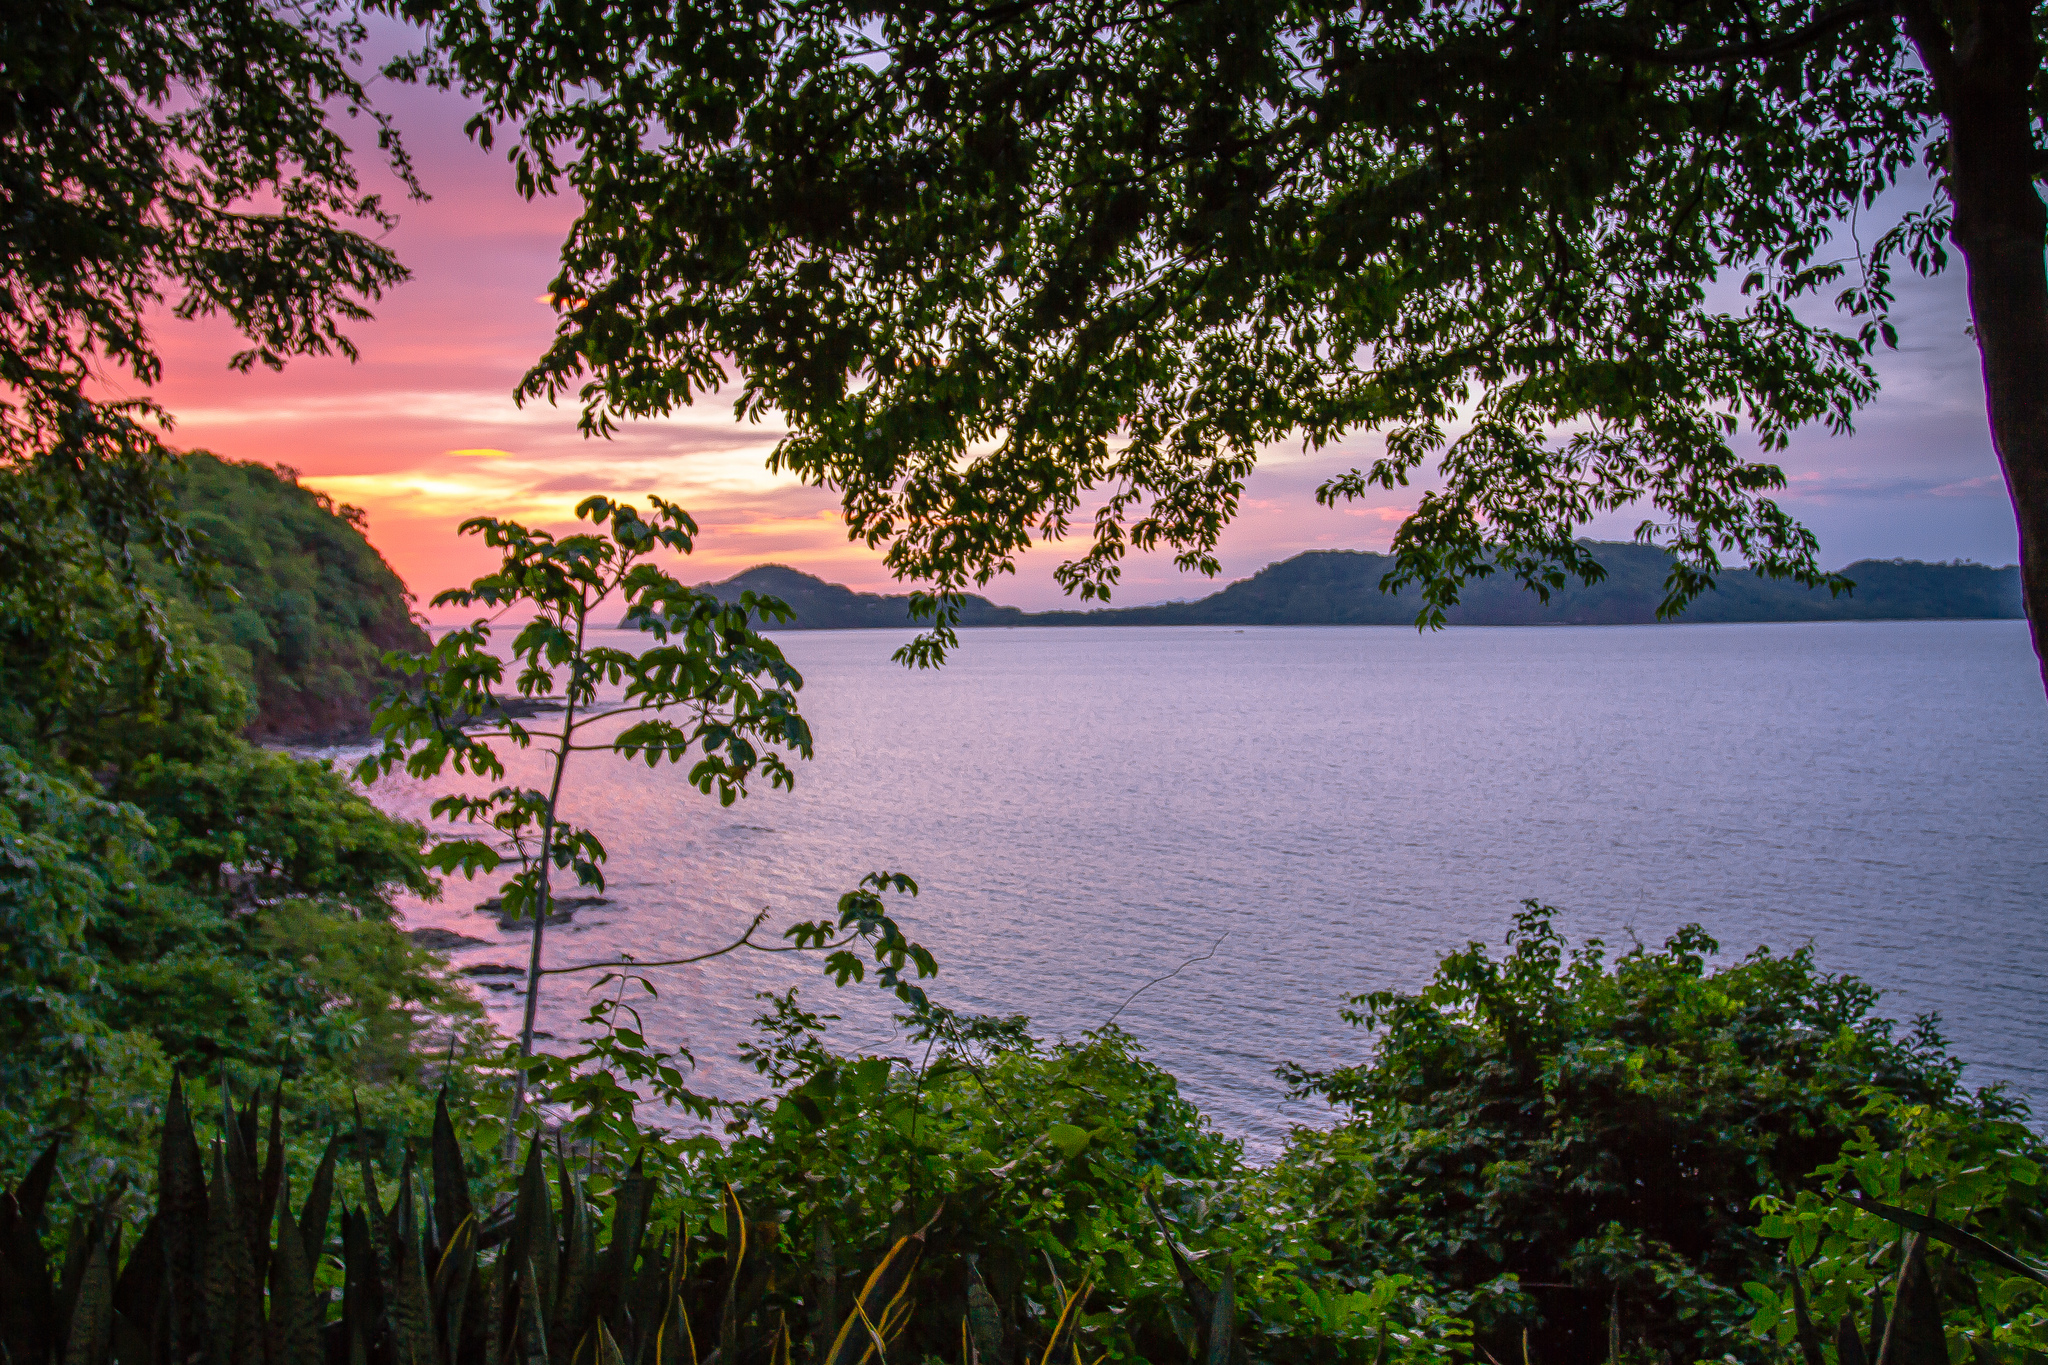 Costa Rica, Rich Country With Natural Beauties – Part 1